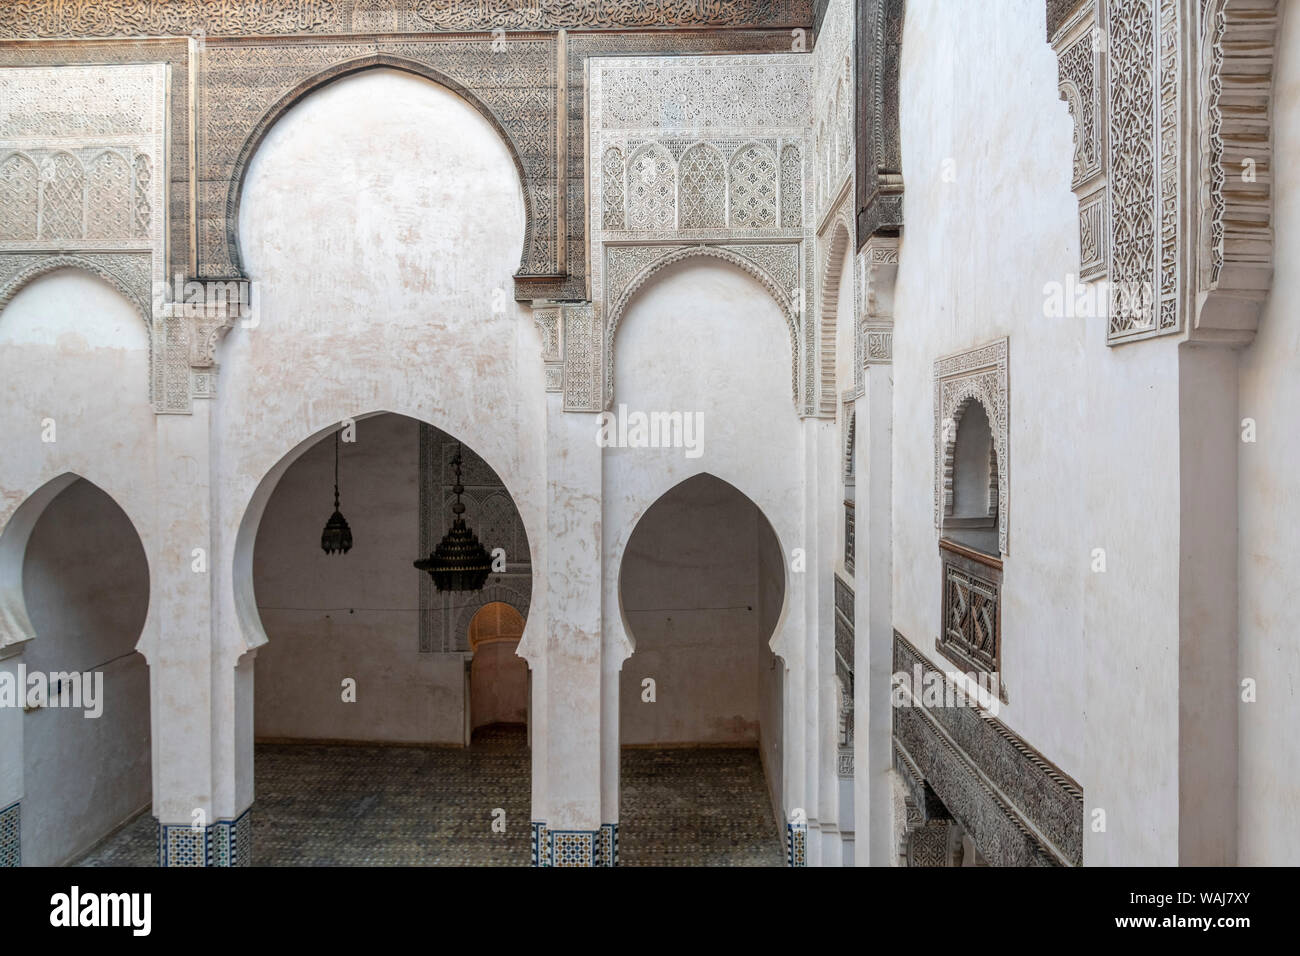 Africa, Morocco, Fes. Building arches and lamps. Credit as: Bill Young / Jaynes Gallery / DanitaDelimont.com Stock Photo